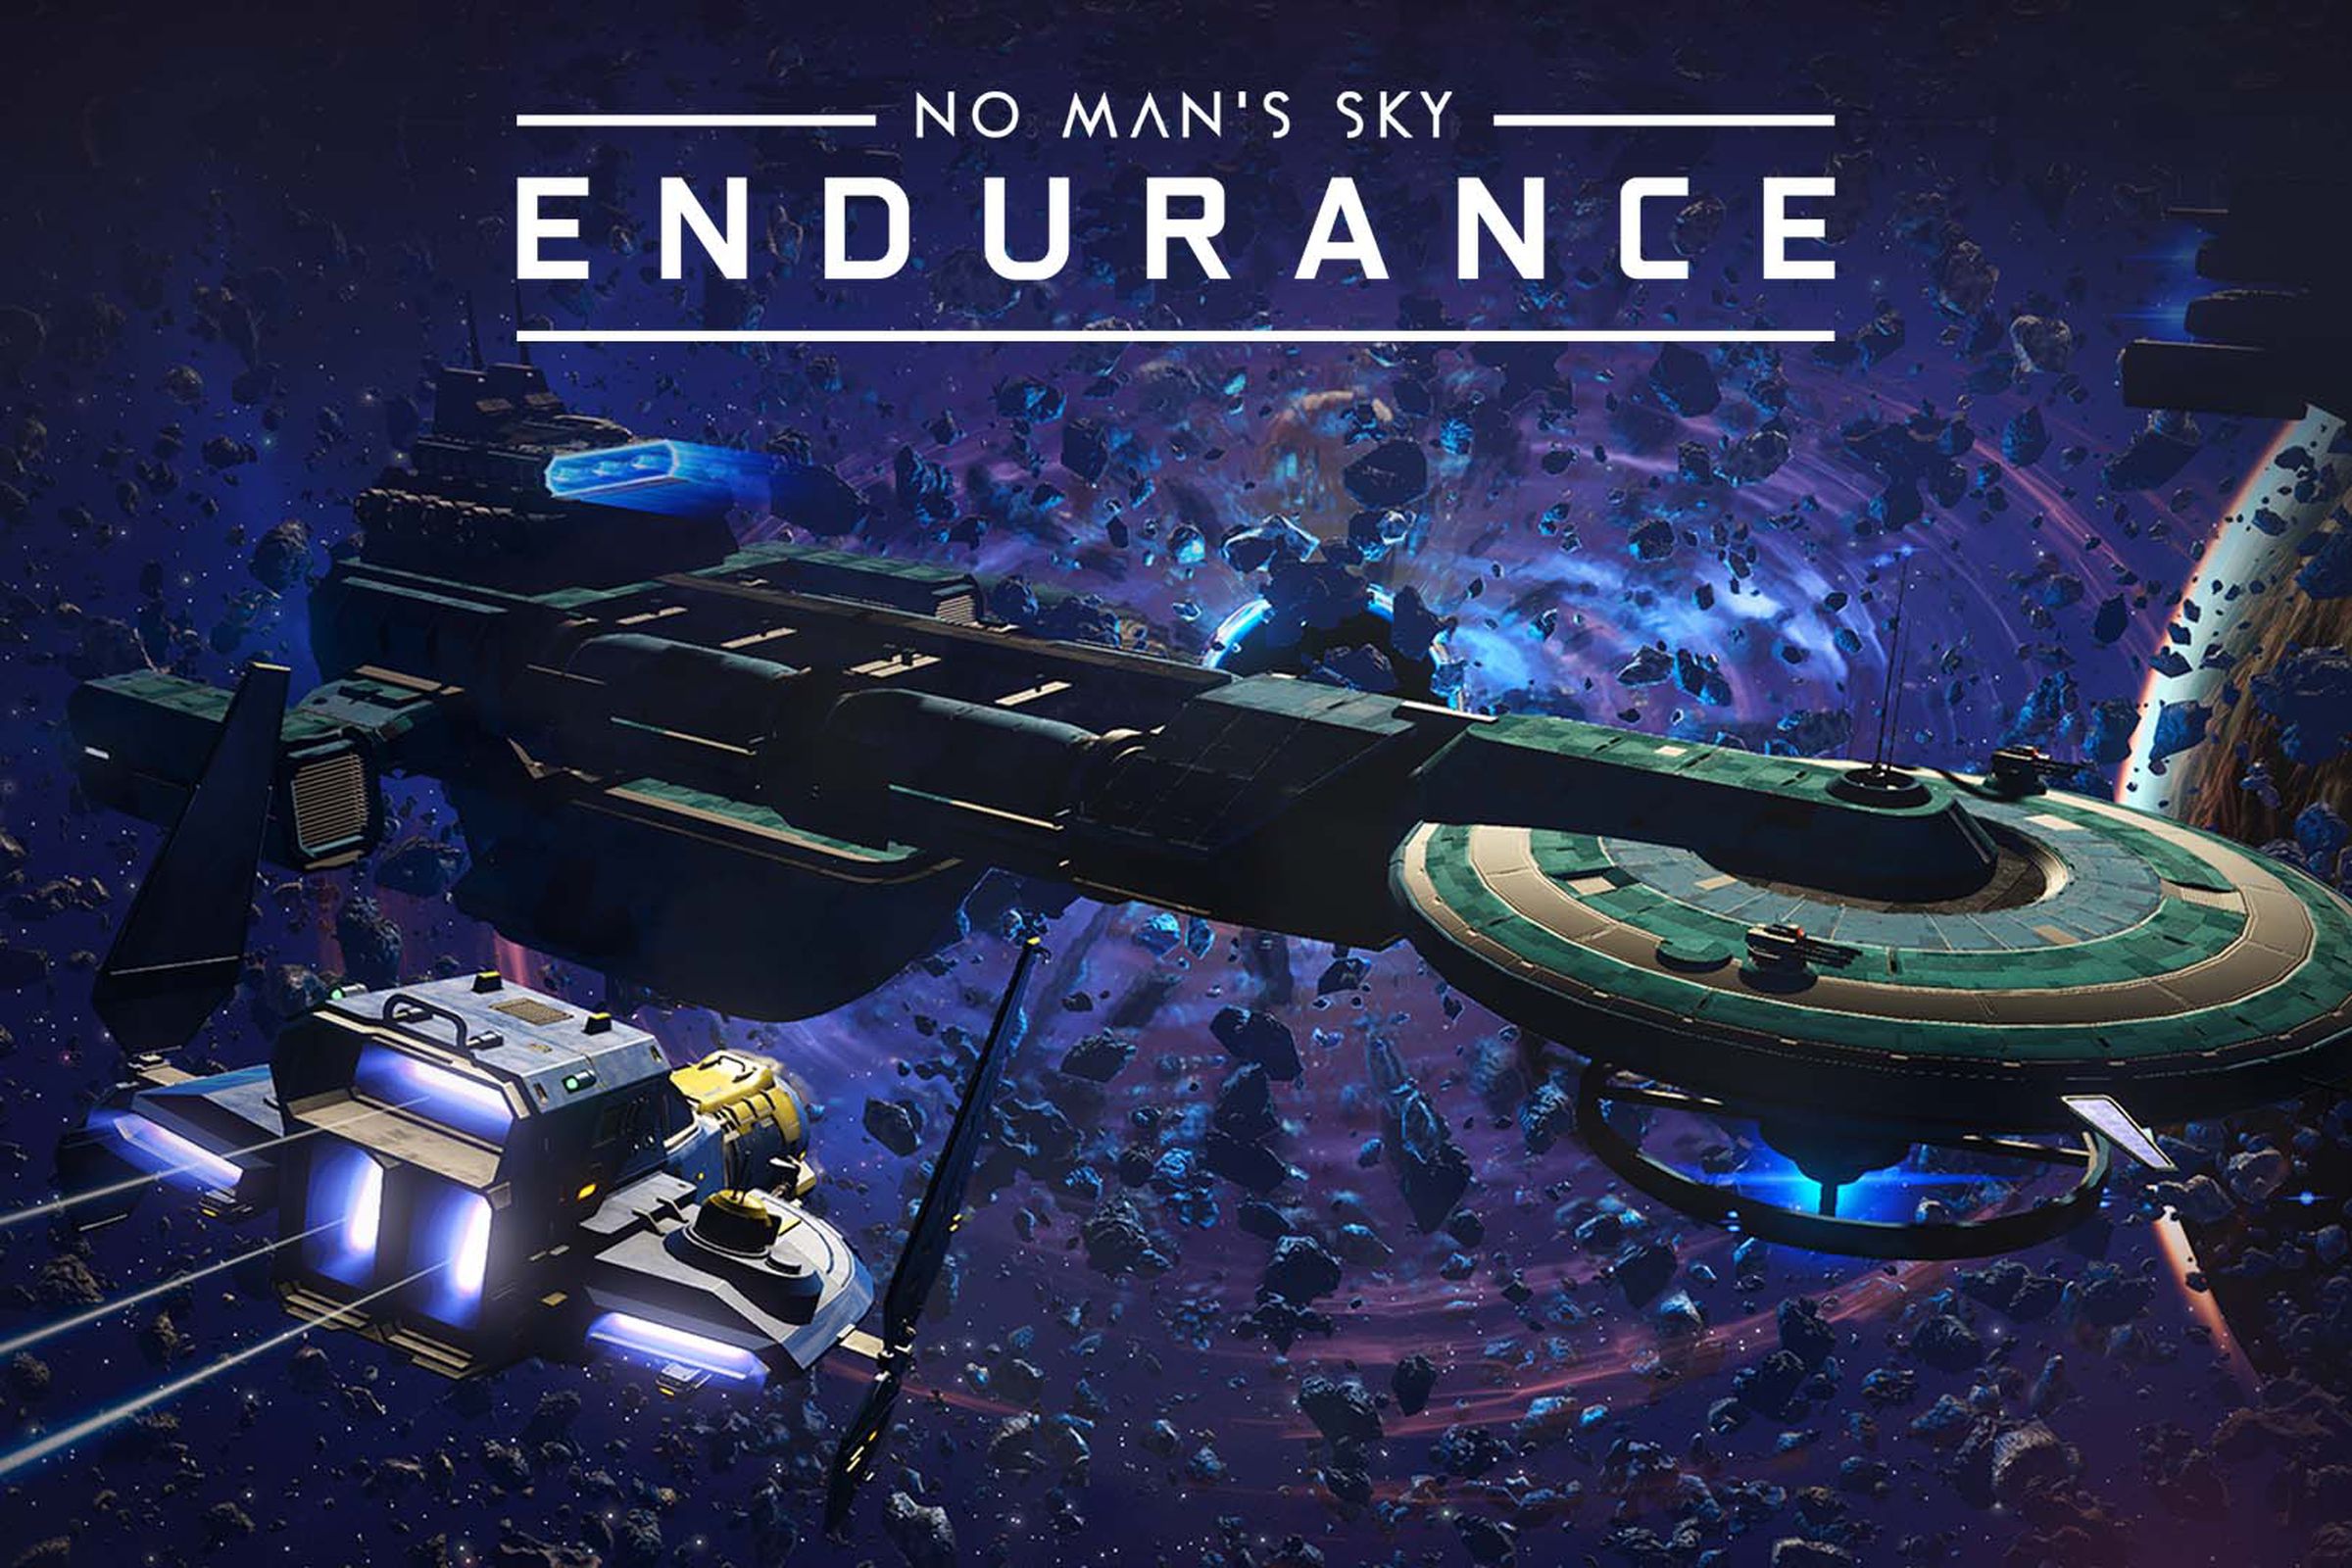 Endurance focuses on the game’s larger ships.